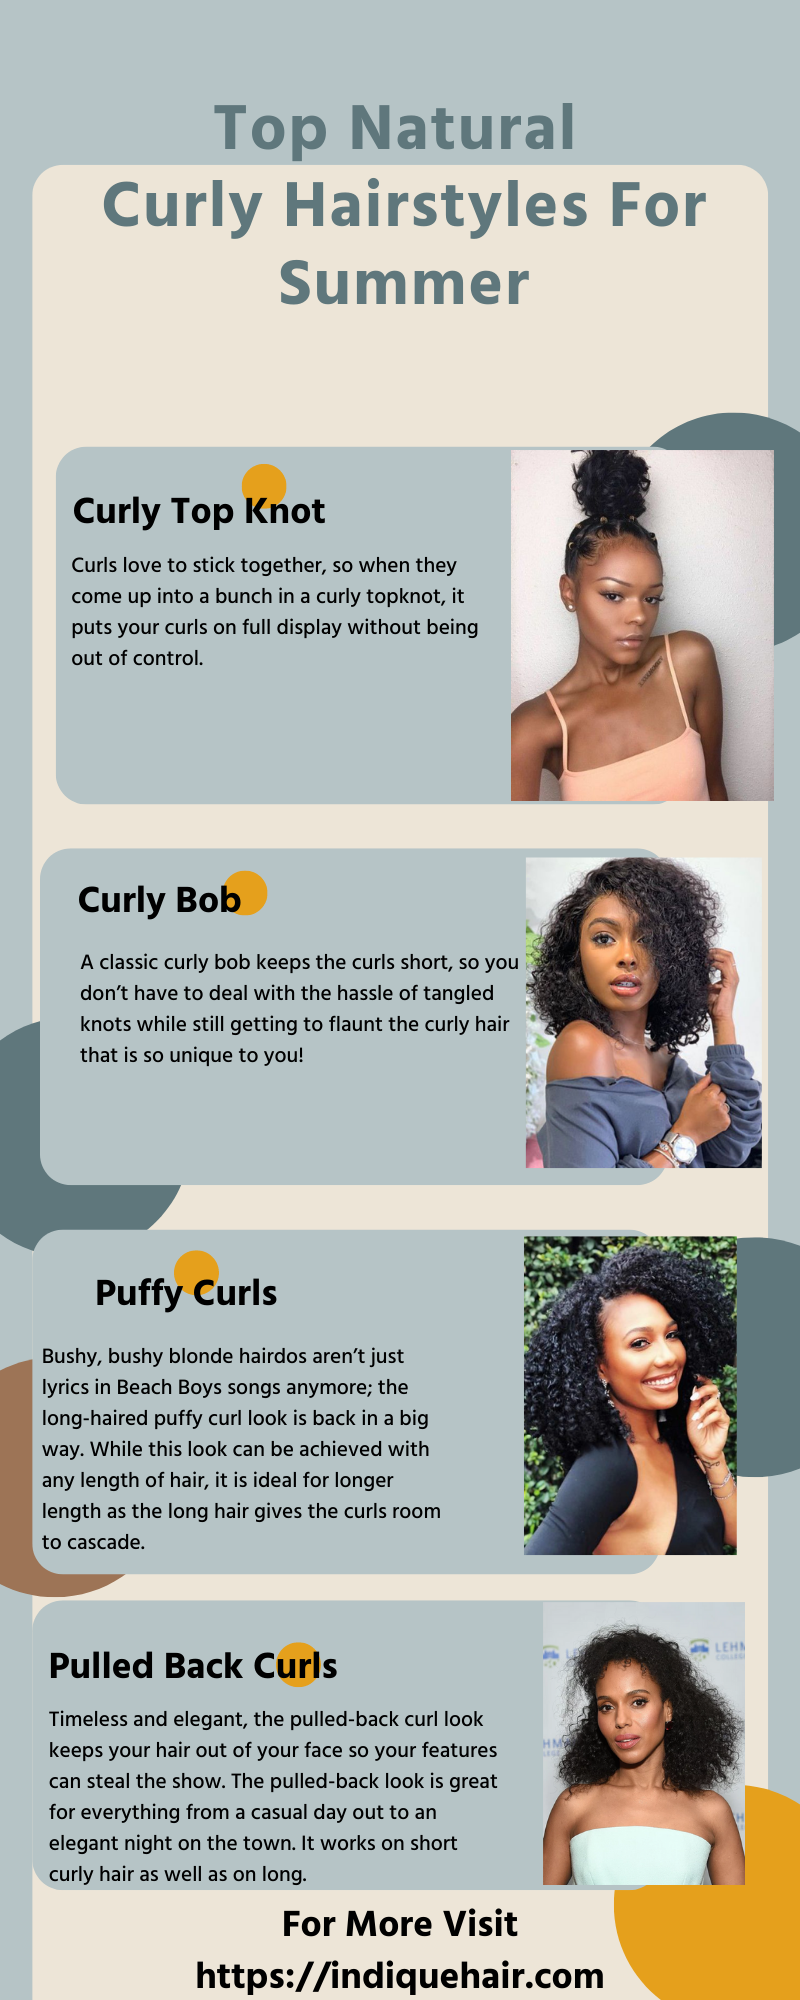 Top Natural Curly Hairstyles in Summer by kayleeashton03 on DeviantArt